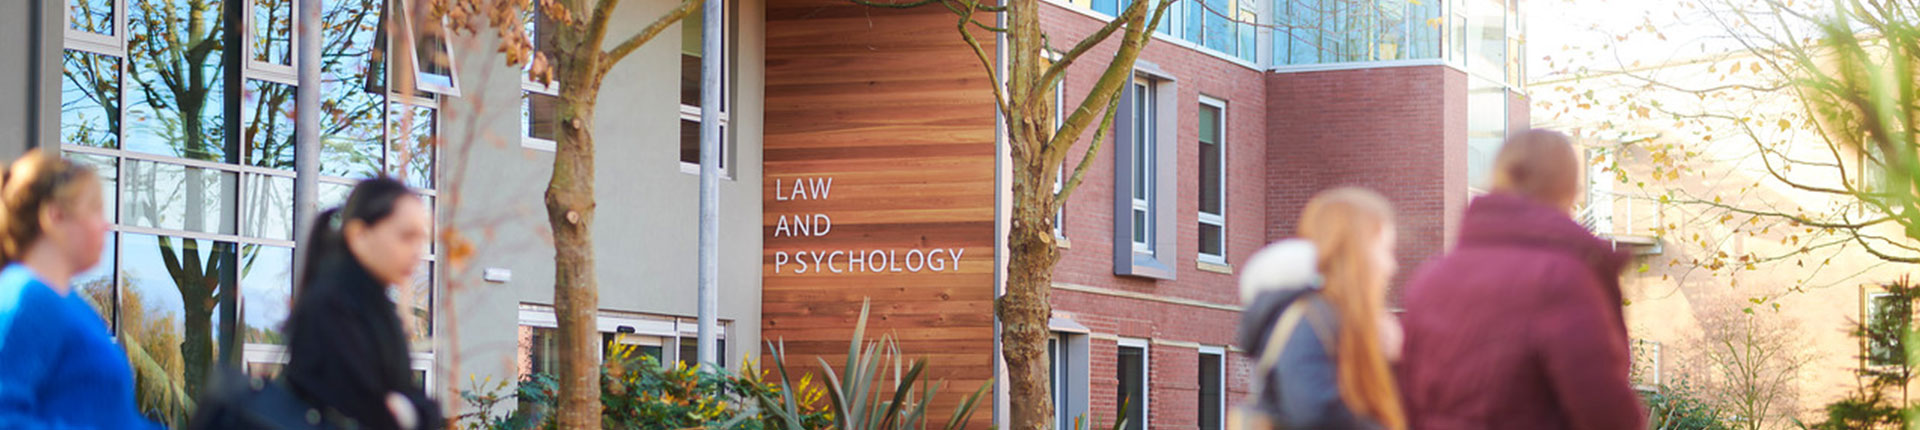 Exterior of the Law and Psychology building. There are four students walking past the building out of focus